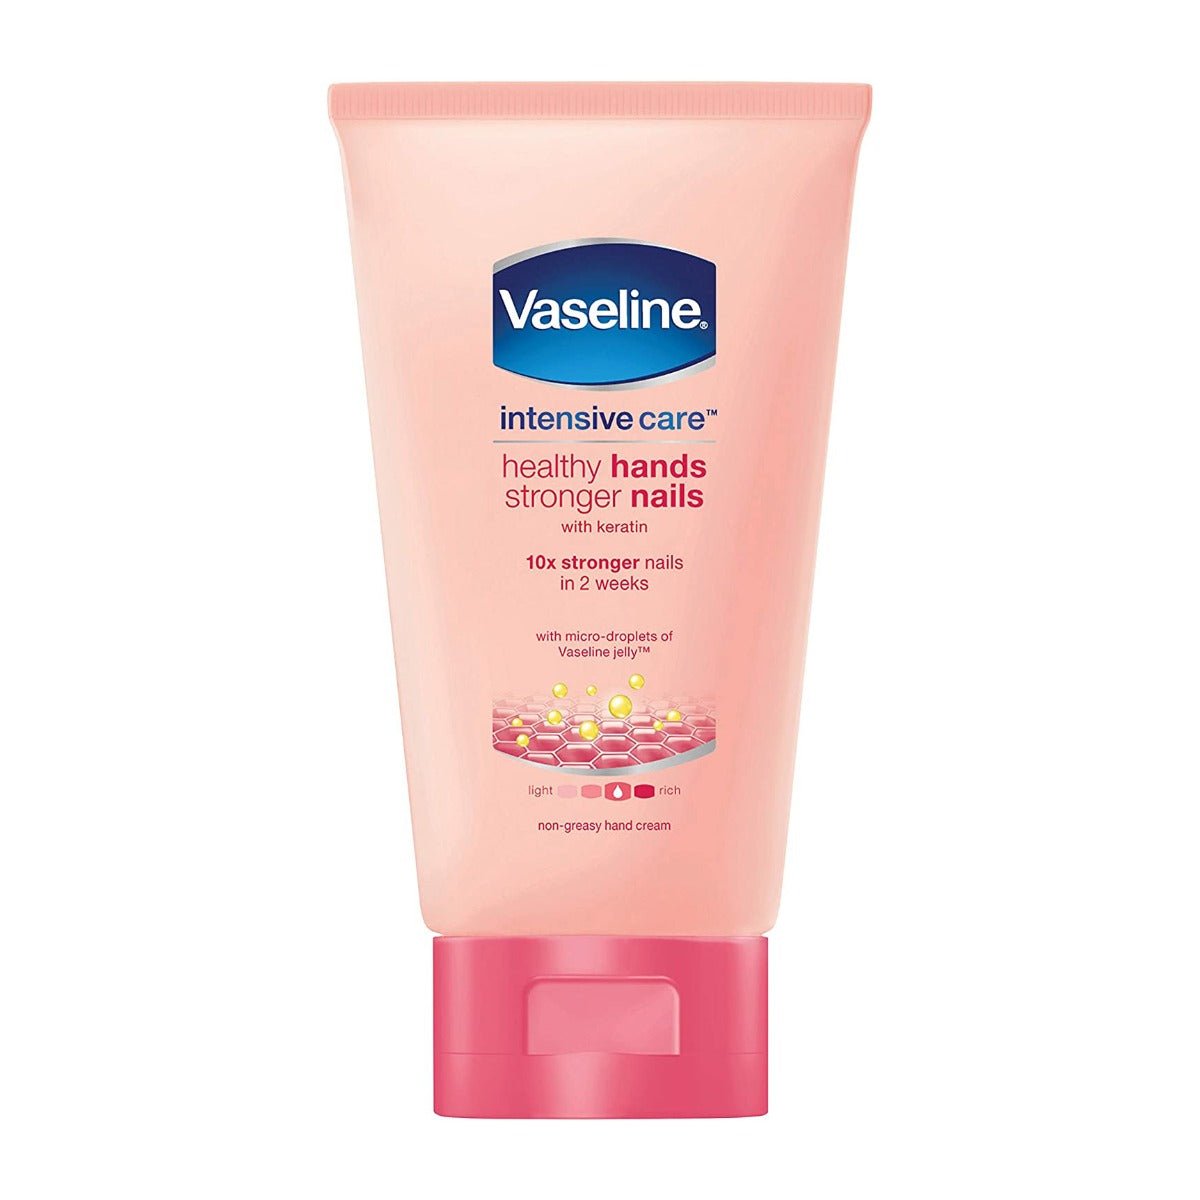 Vaseline Intensive Care Healthy Hands Stronger Nails Lotion - Bloom Pharmacy